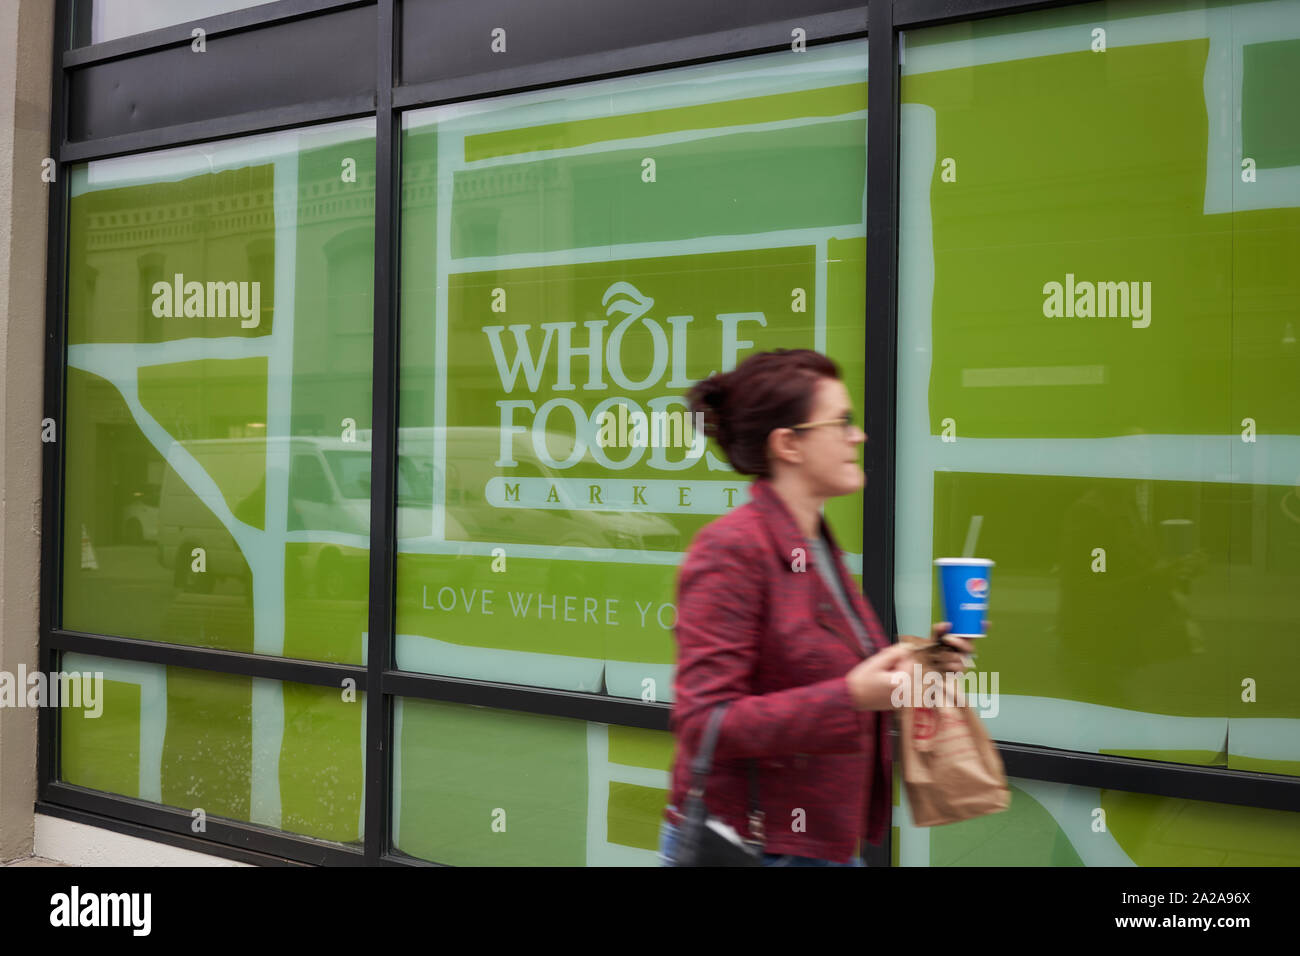 Portland, Oregon, USA - Sep 27, 2019: A woman with a to-go lunch bag and a soda outside a Whole Foods Market store in downtown Portland. Stock Photo